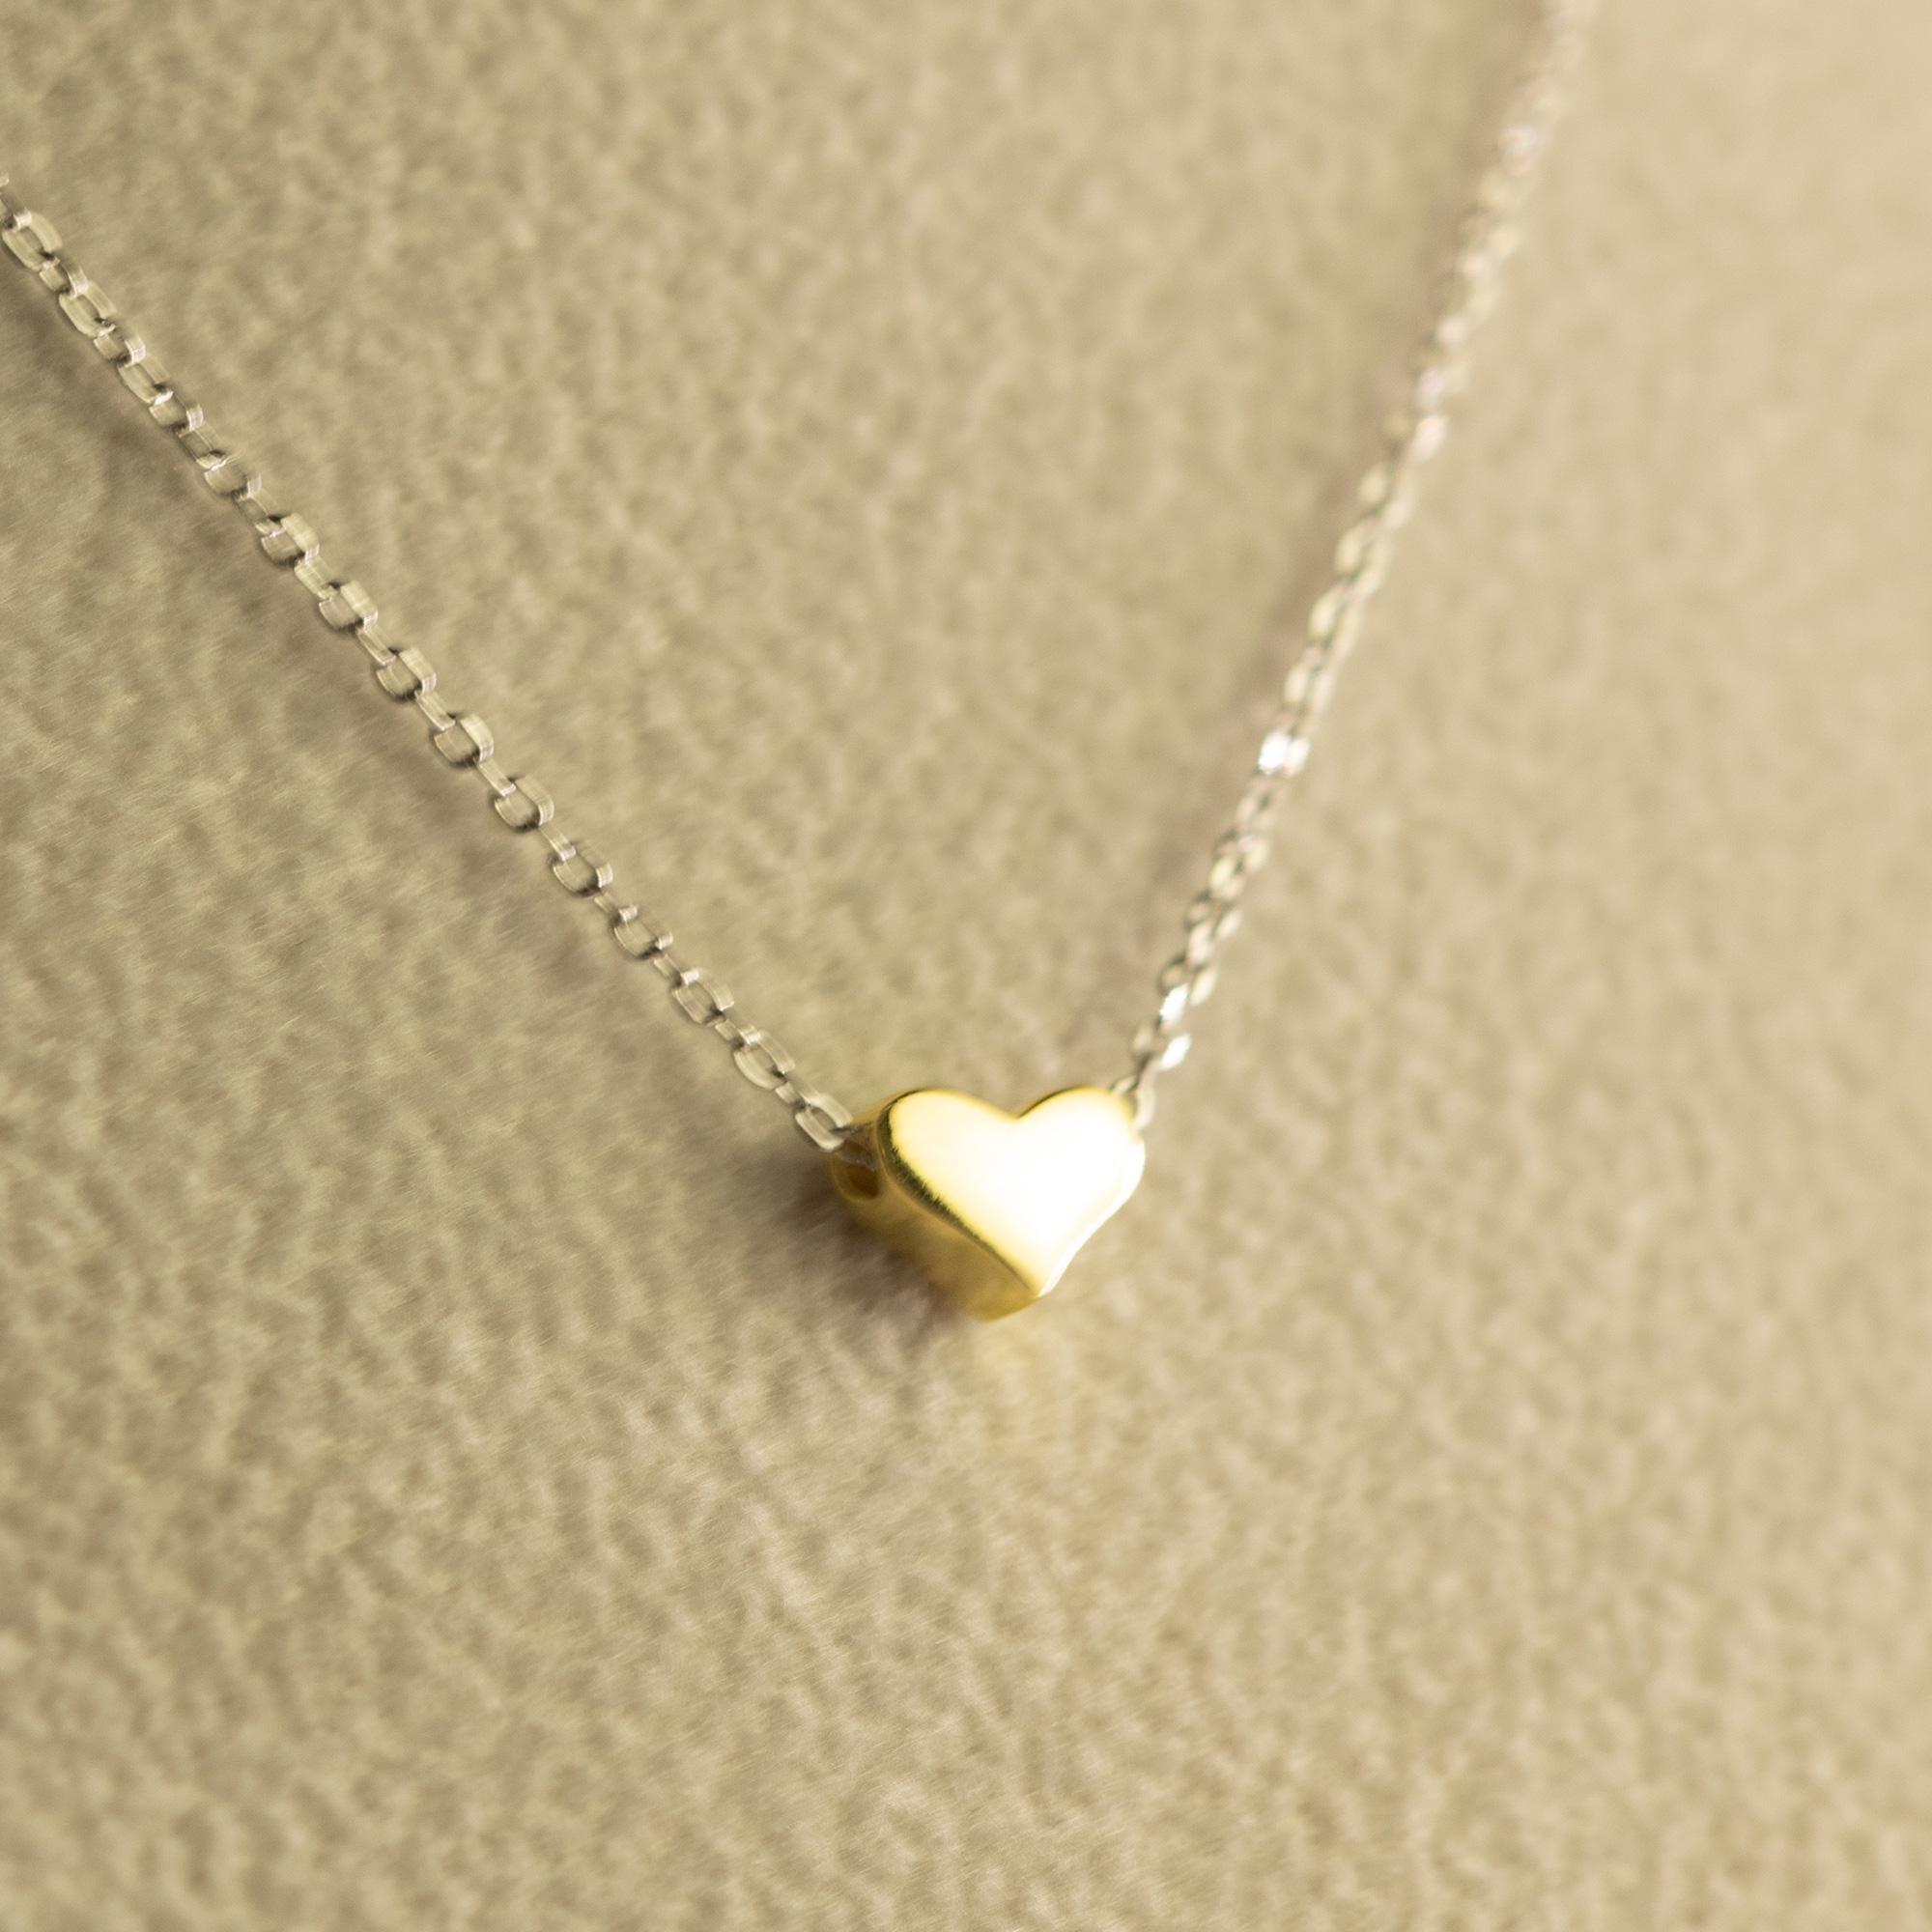 Precious and delicate Heart shaped pendant hanging from a delicate White Gold chain. 
Romantic jewellery for an everyday graceful gift.

• Sterling Silver Chain Necklace
• Gold FilledHeart shape pendant 0.7 x 0.5 cm
• Total Length 42 cm
• Total